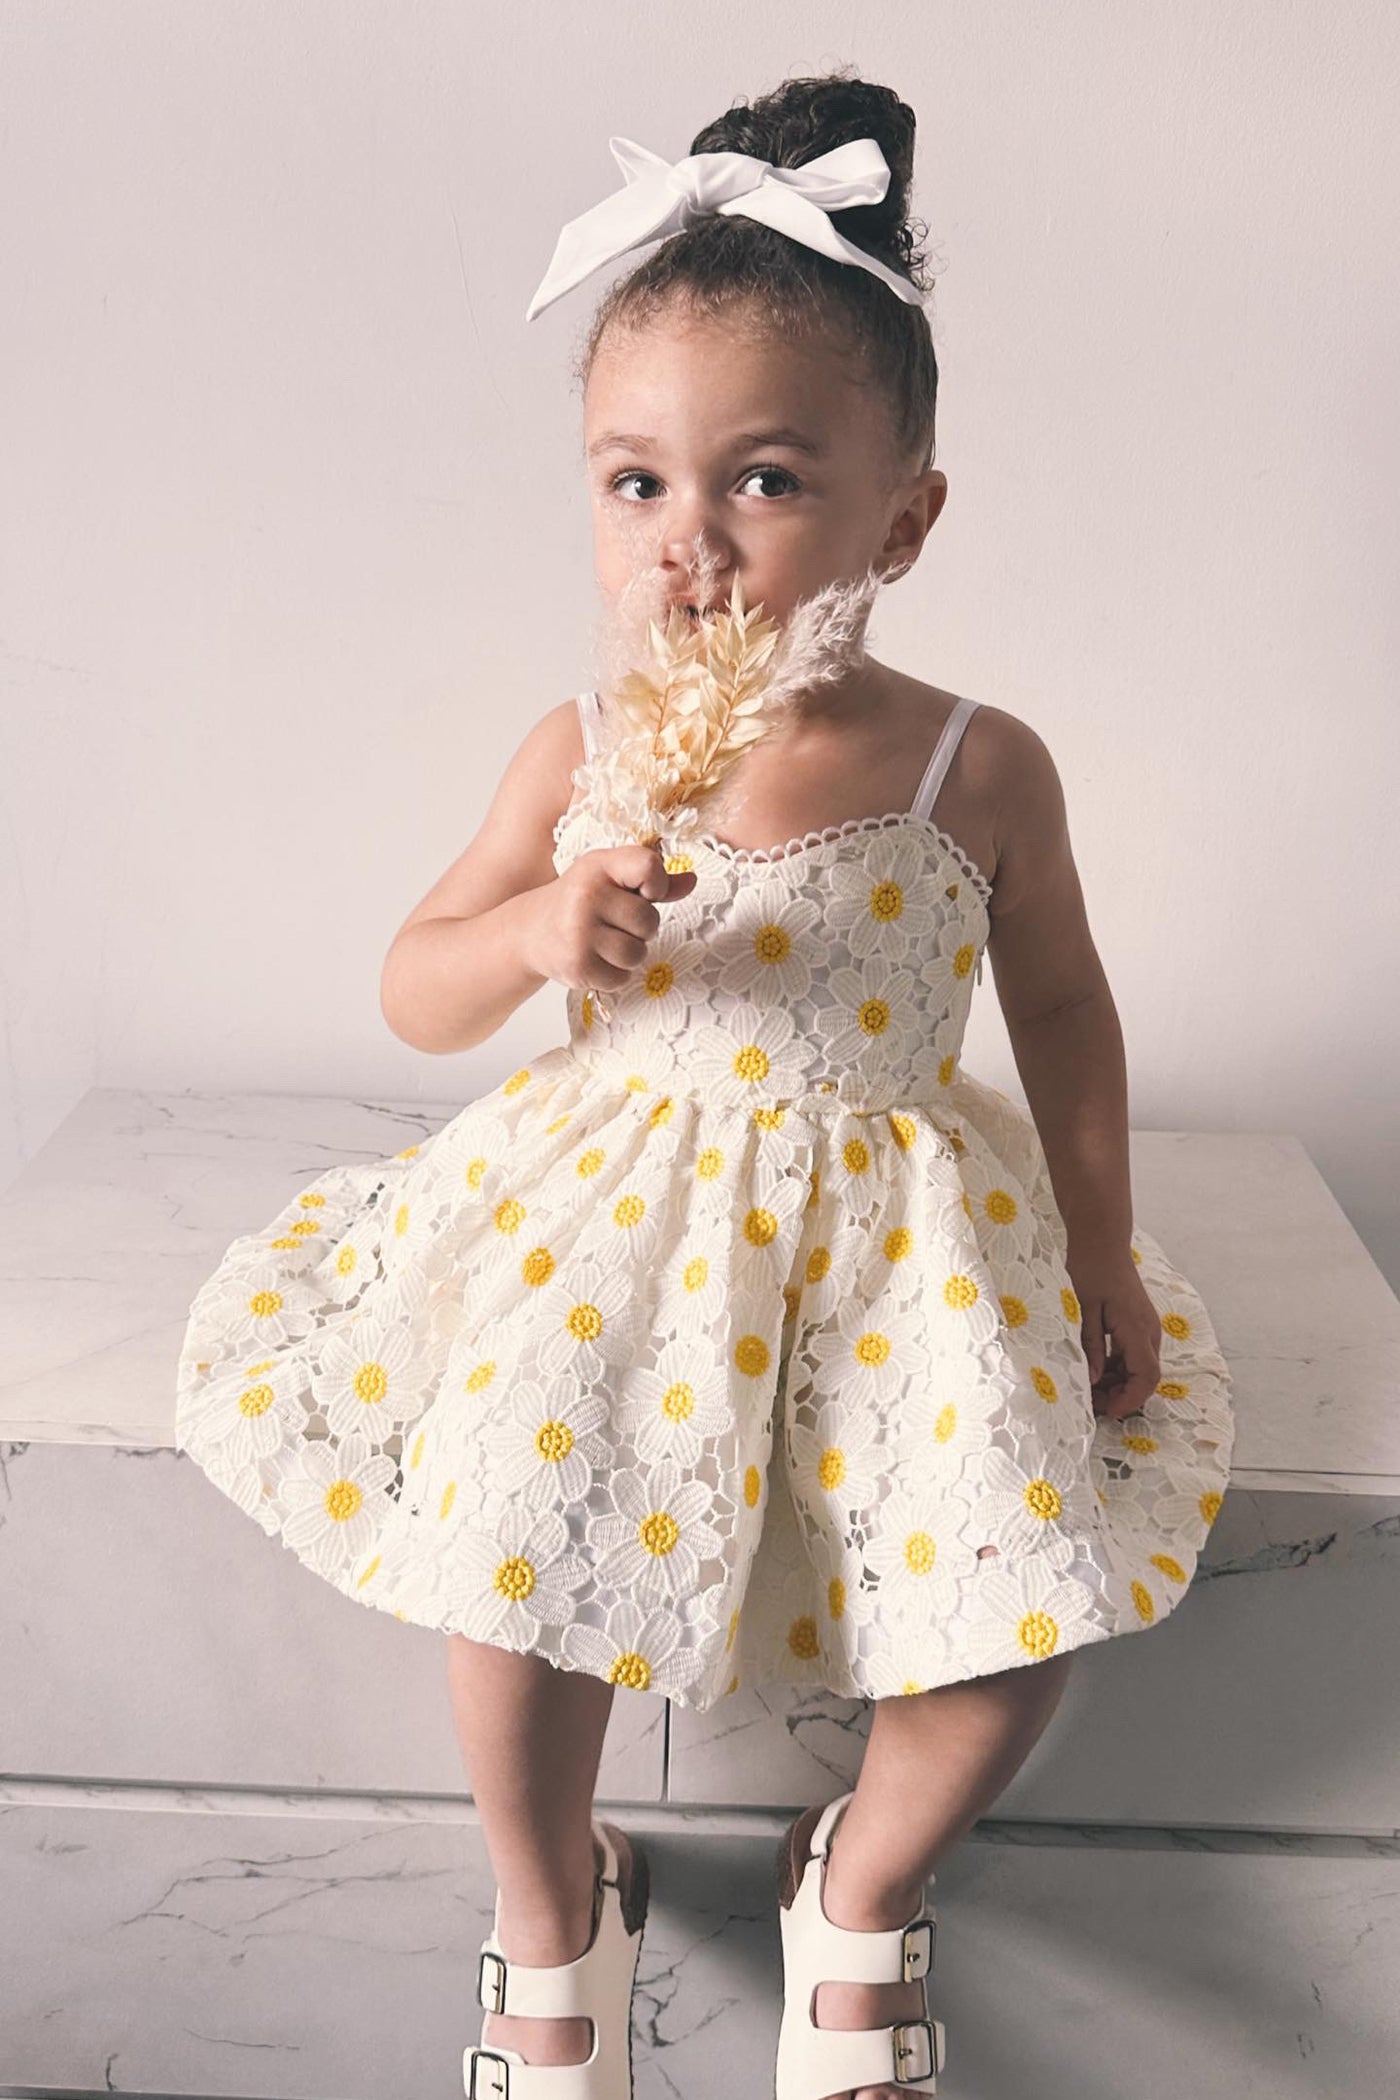 How Sweet It Is Dress - Daisy Chains Lace